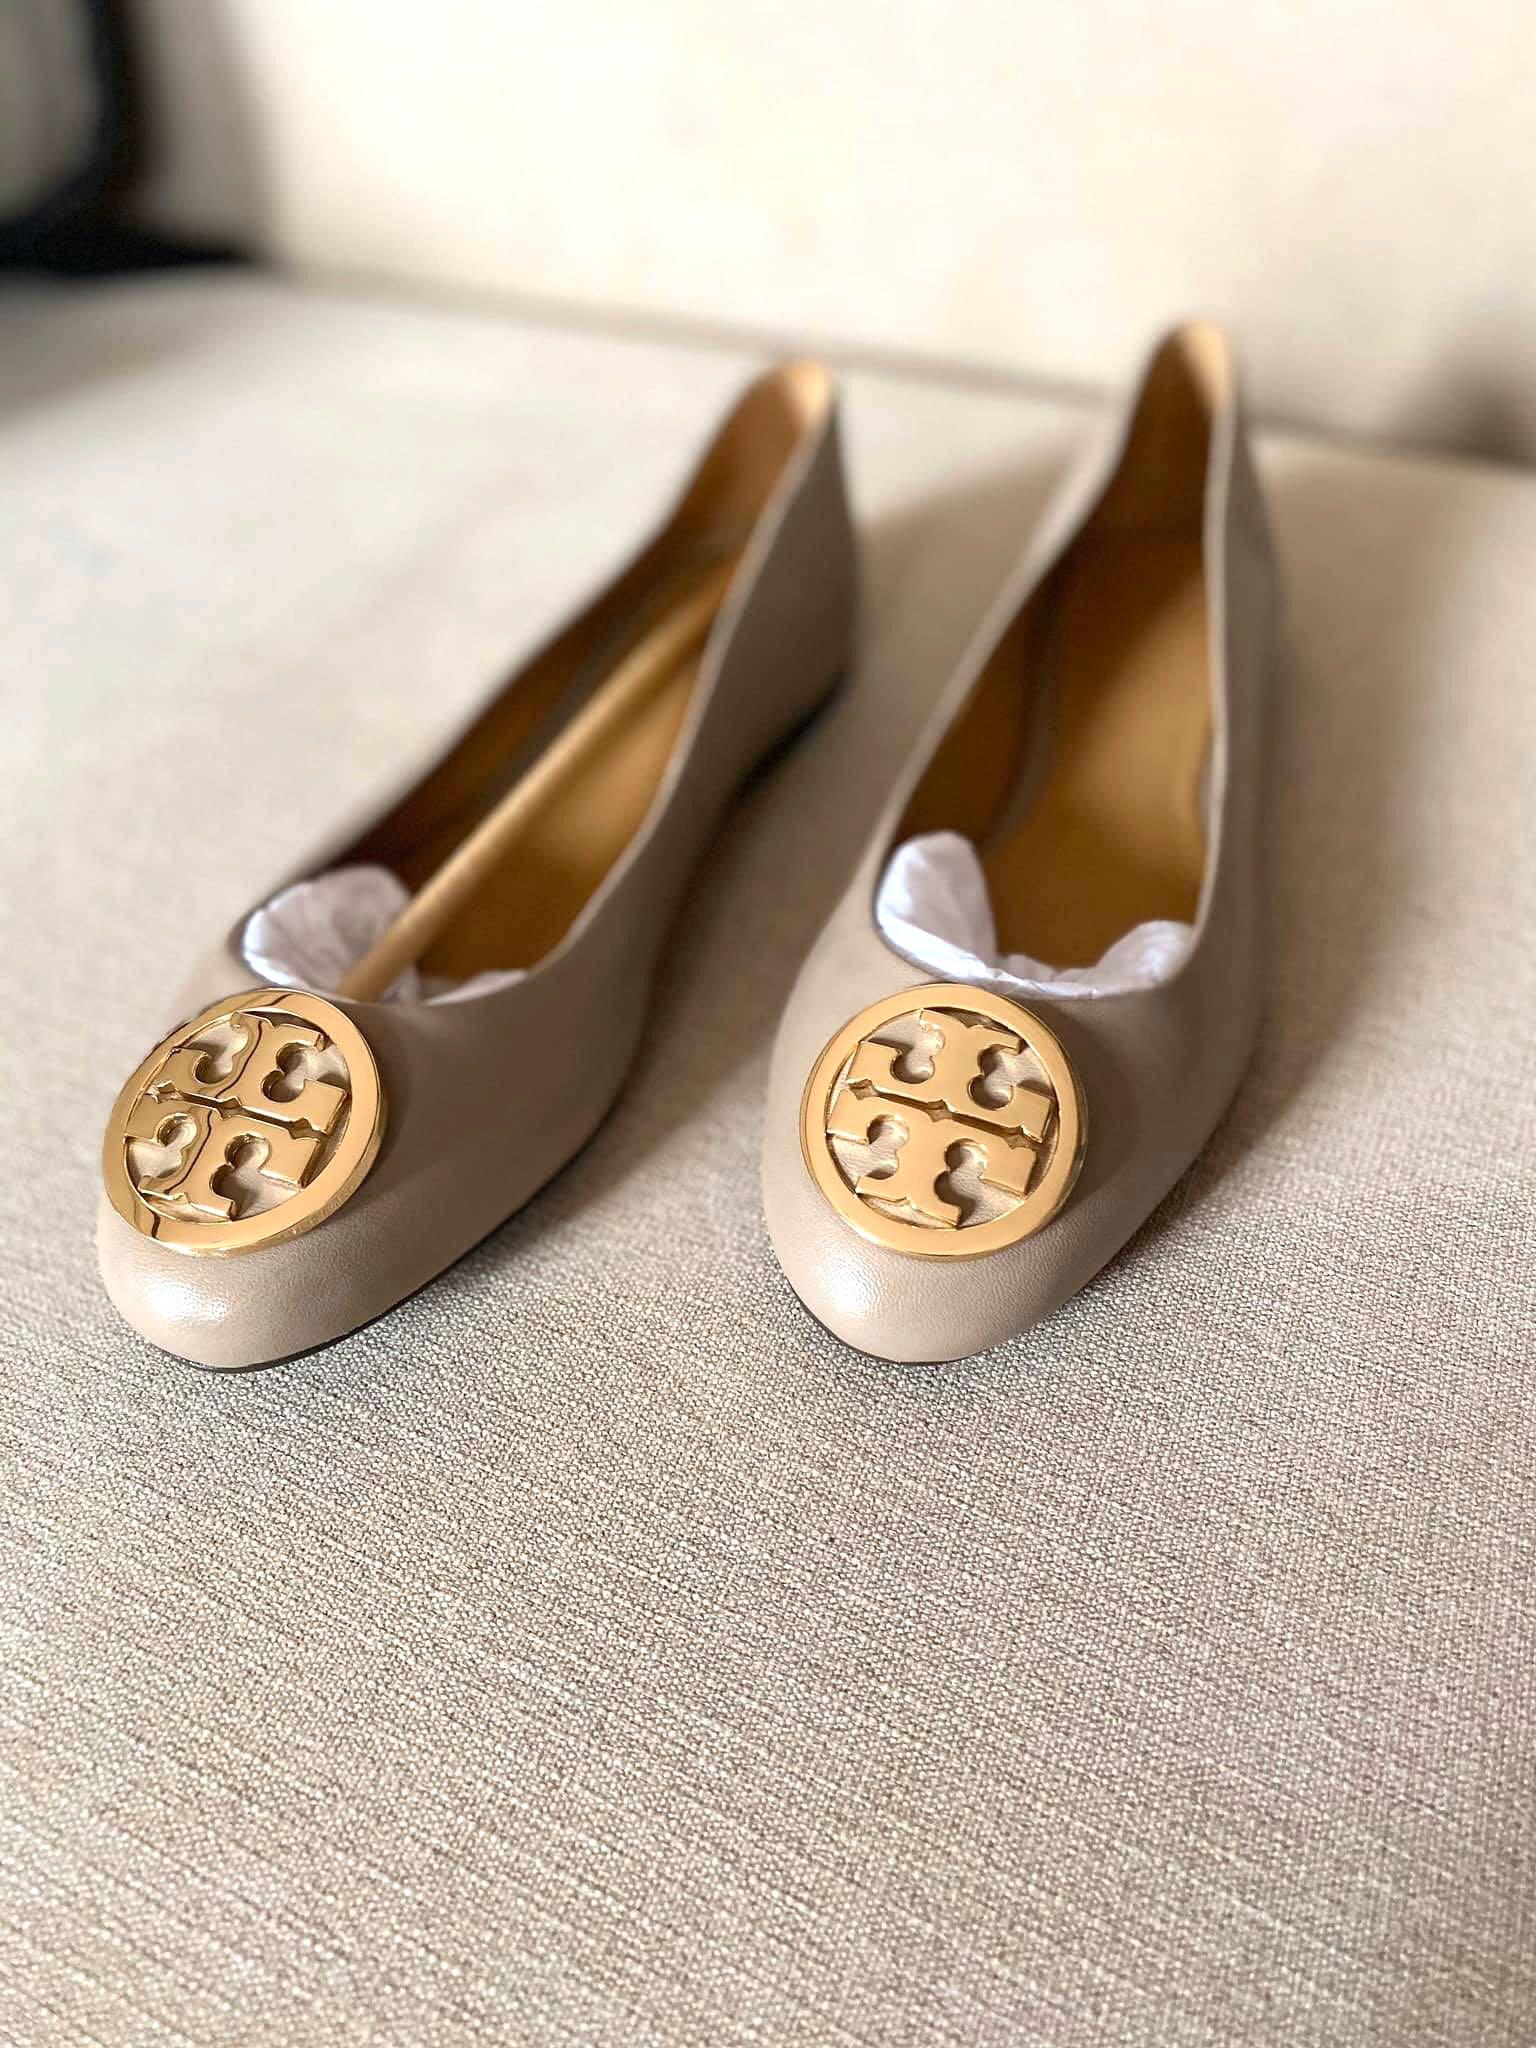 Tory Burch Ballet Flats Close Shoes Flats Size 7 from USA 🇺🇸, Women's  Fashion, Footwear, Flats & Sandals on Carousell